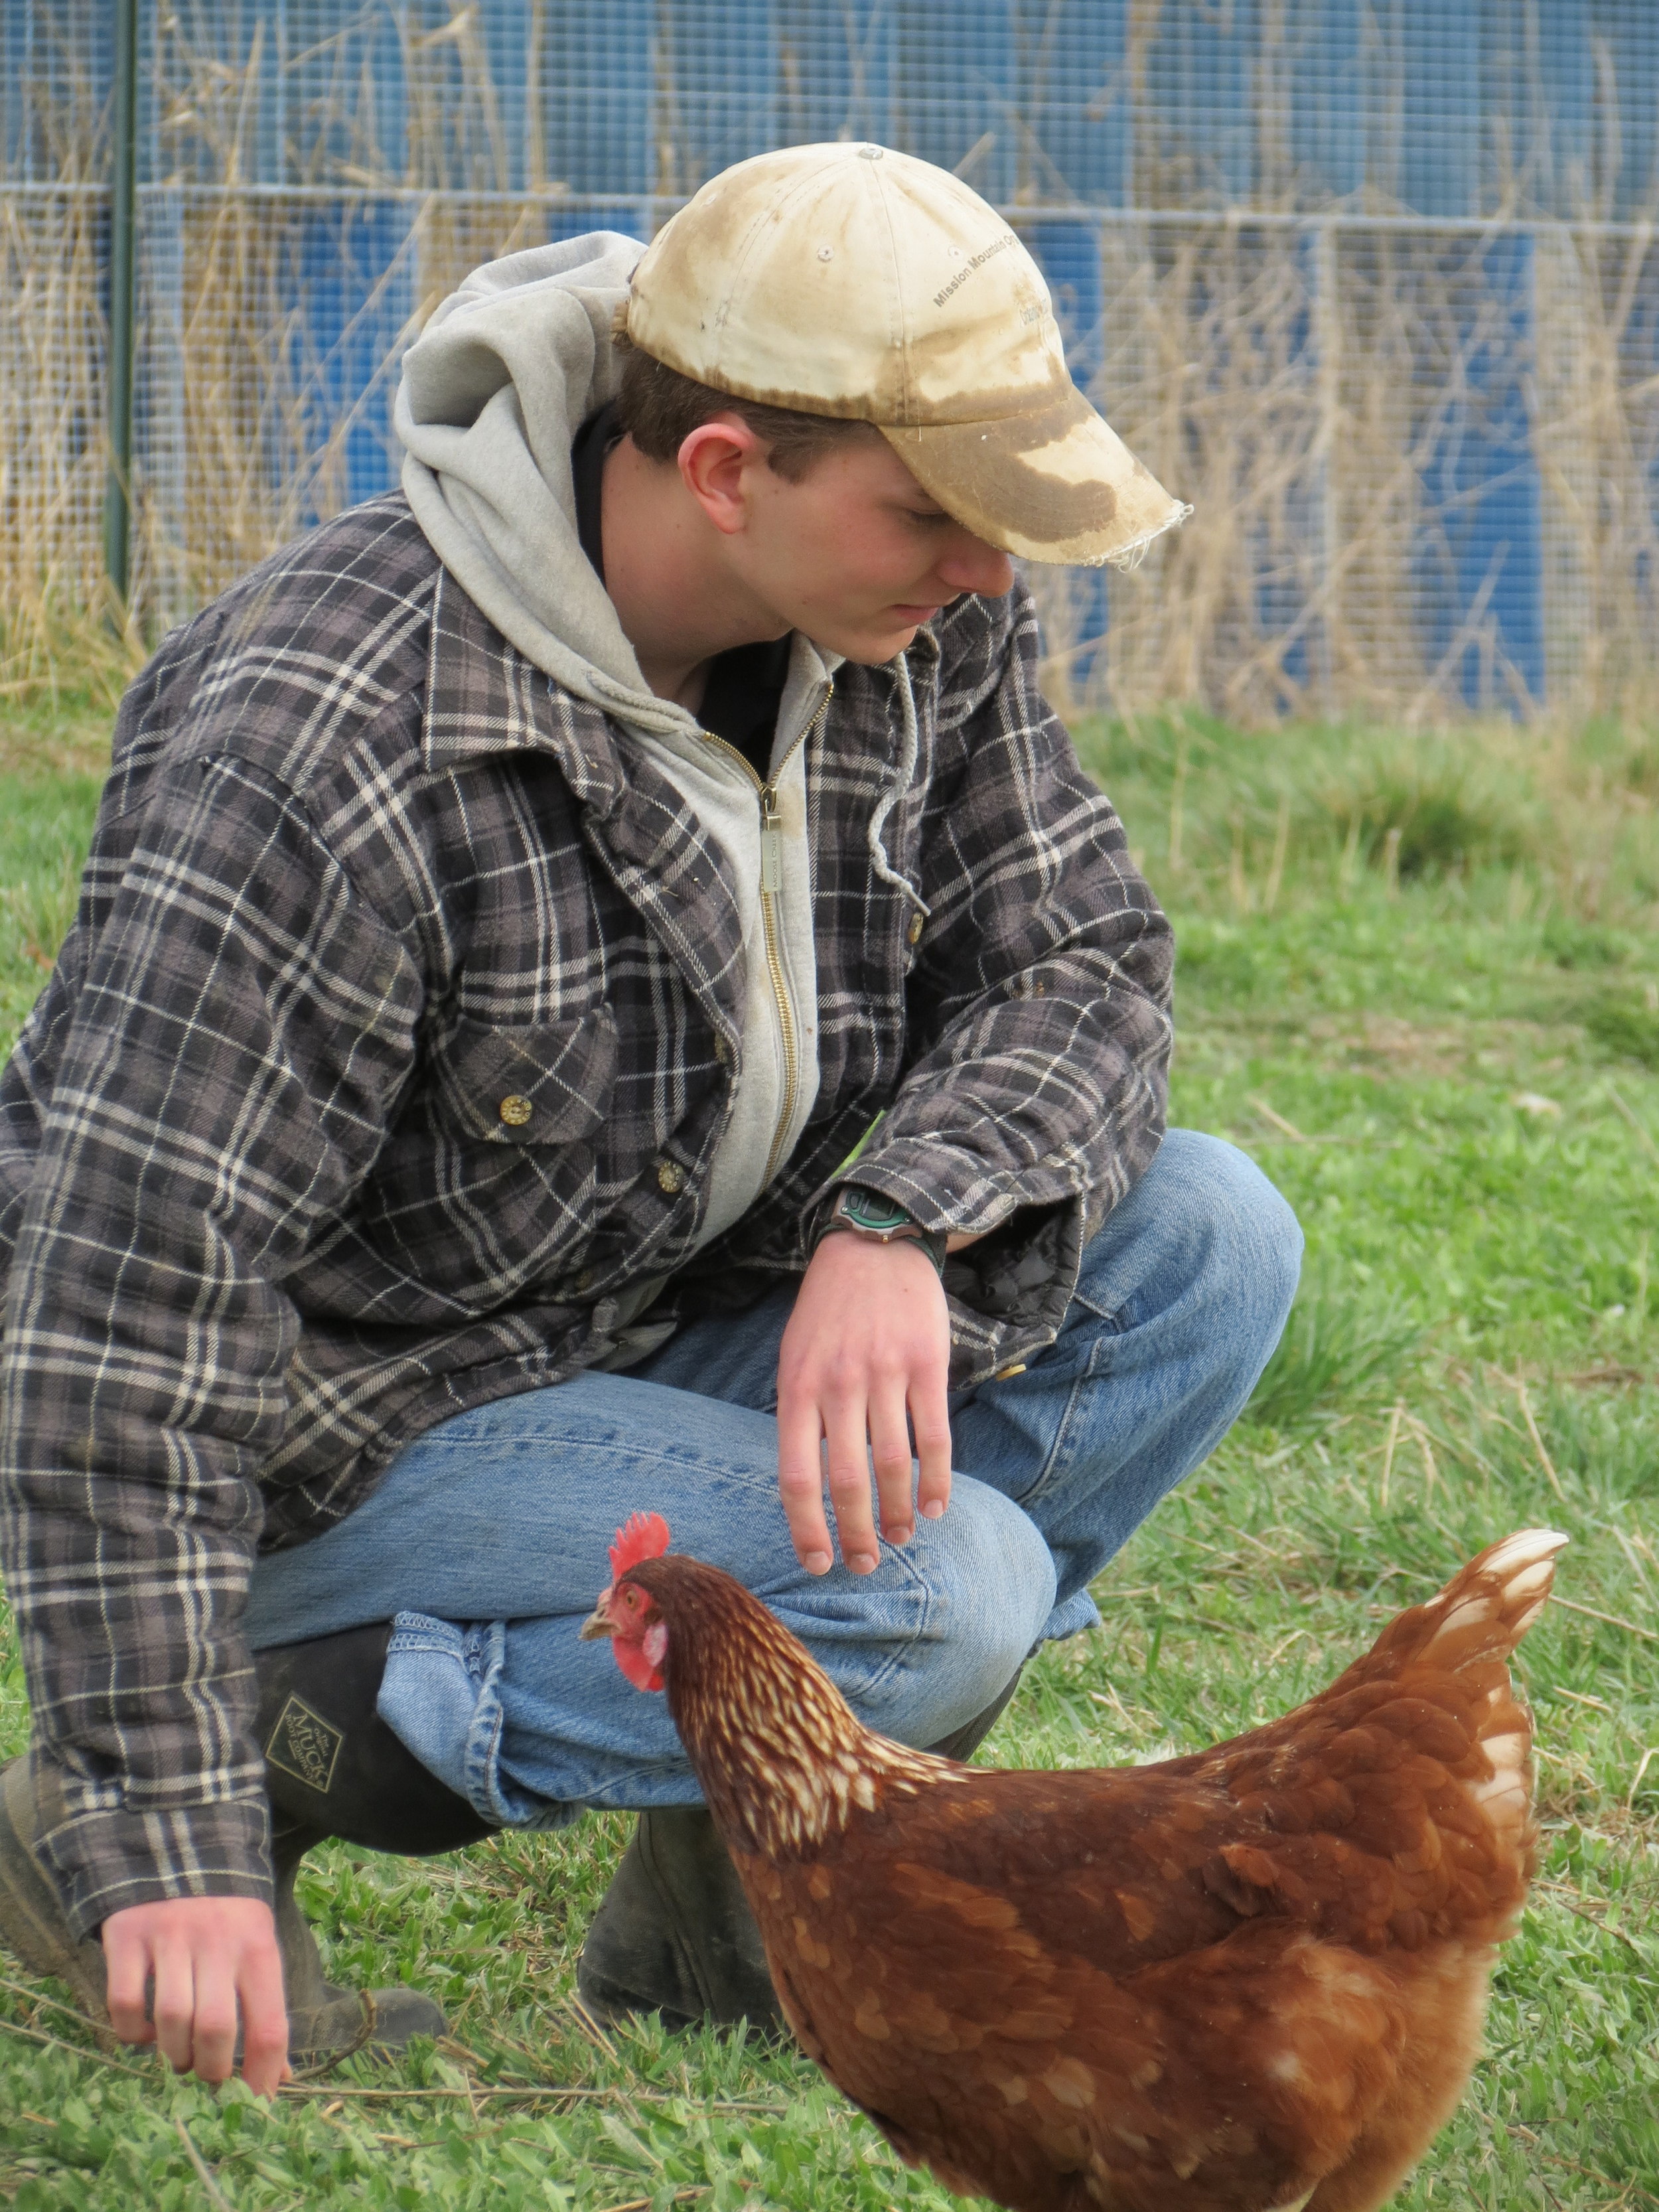 Out in the pasture with the chickens